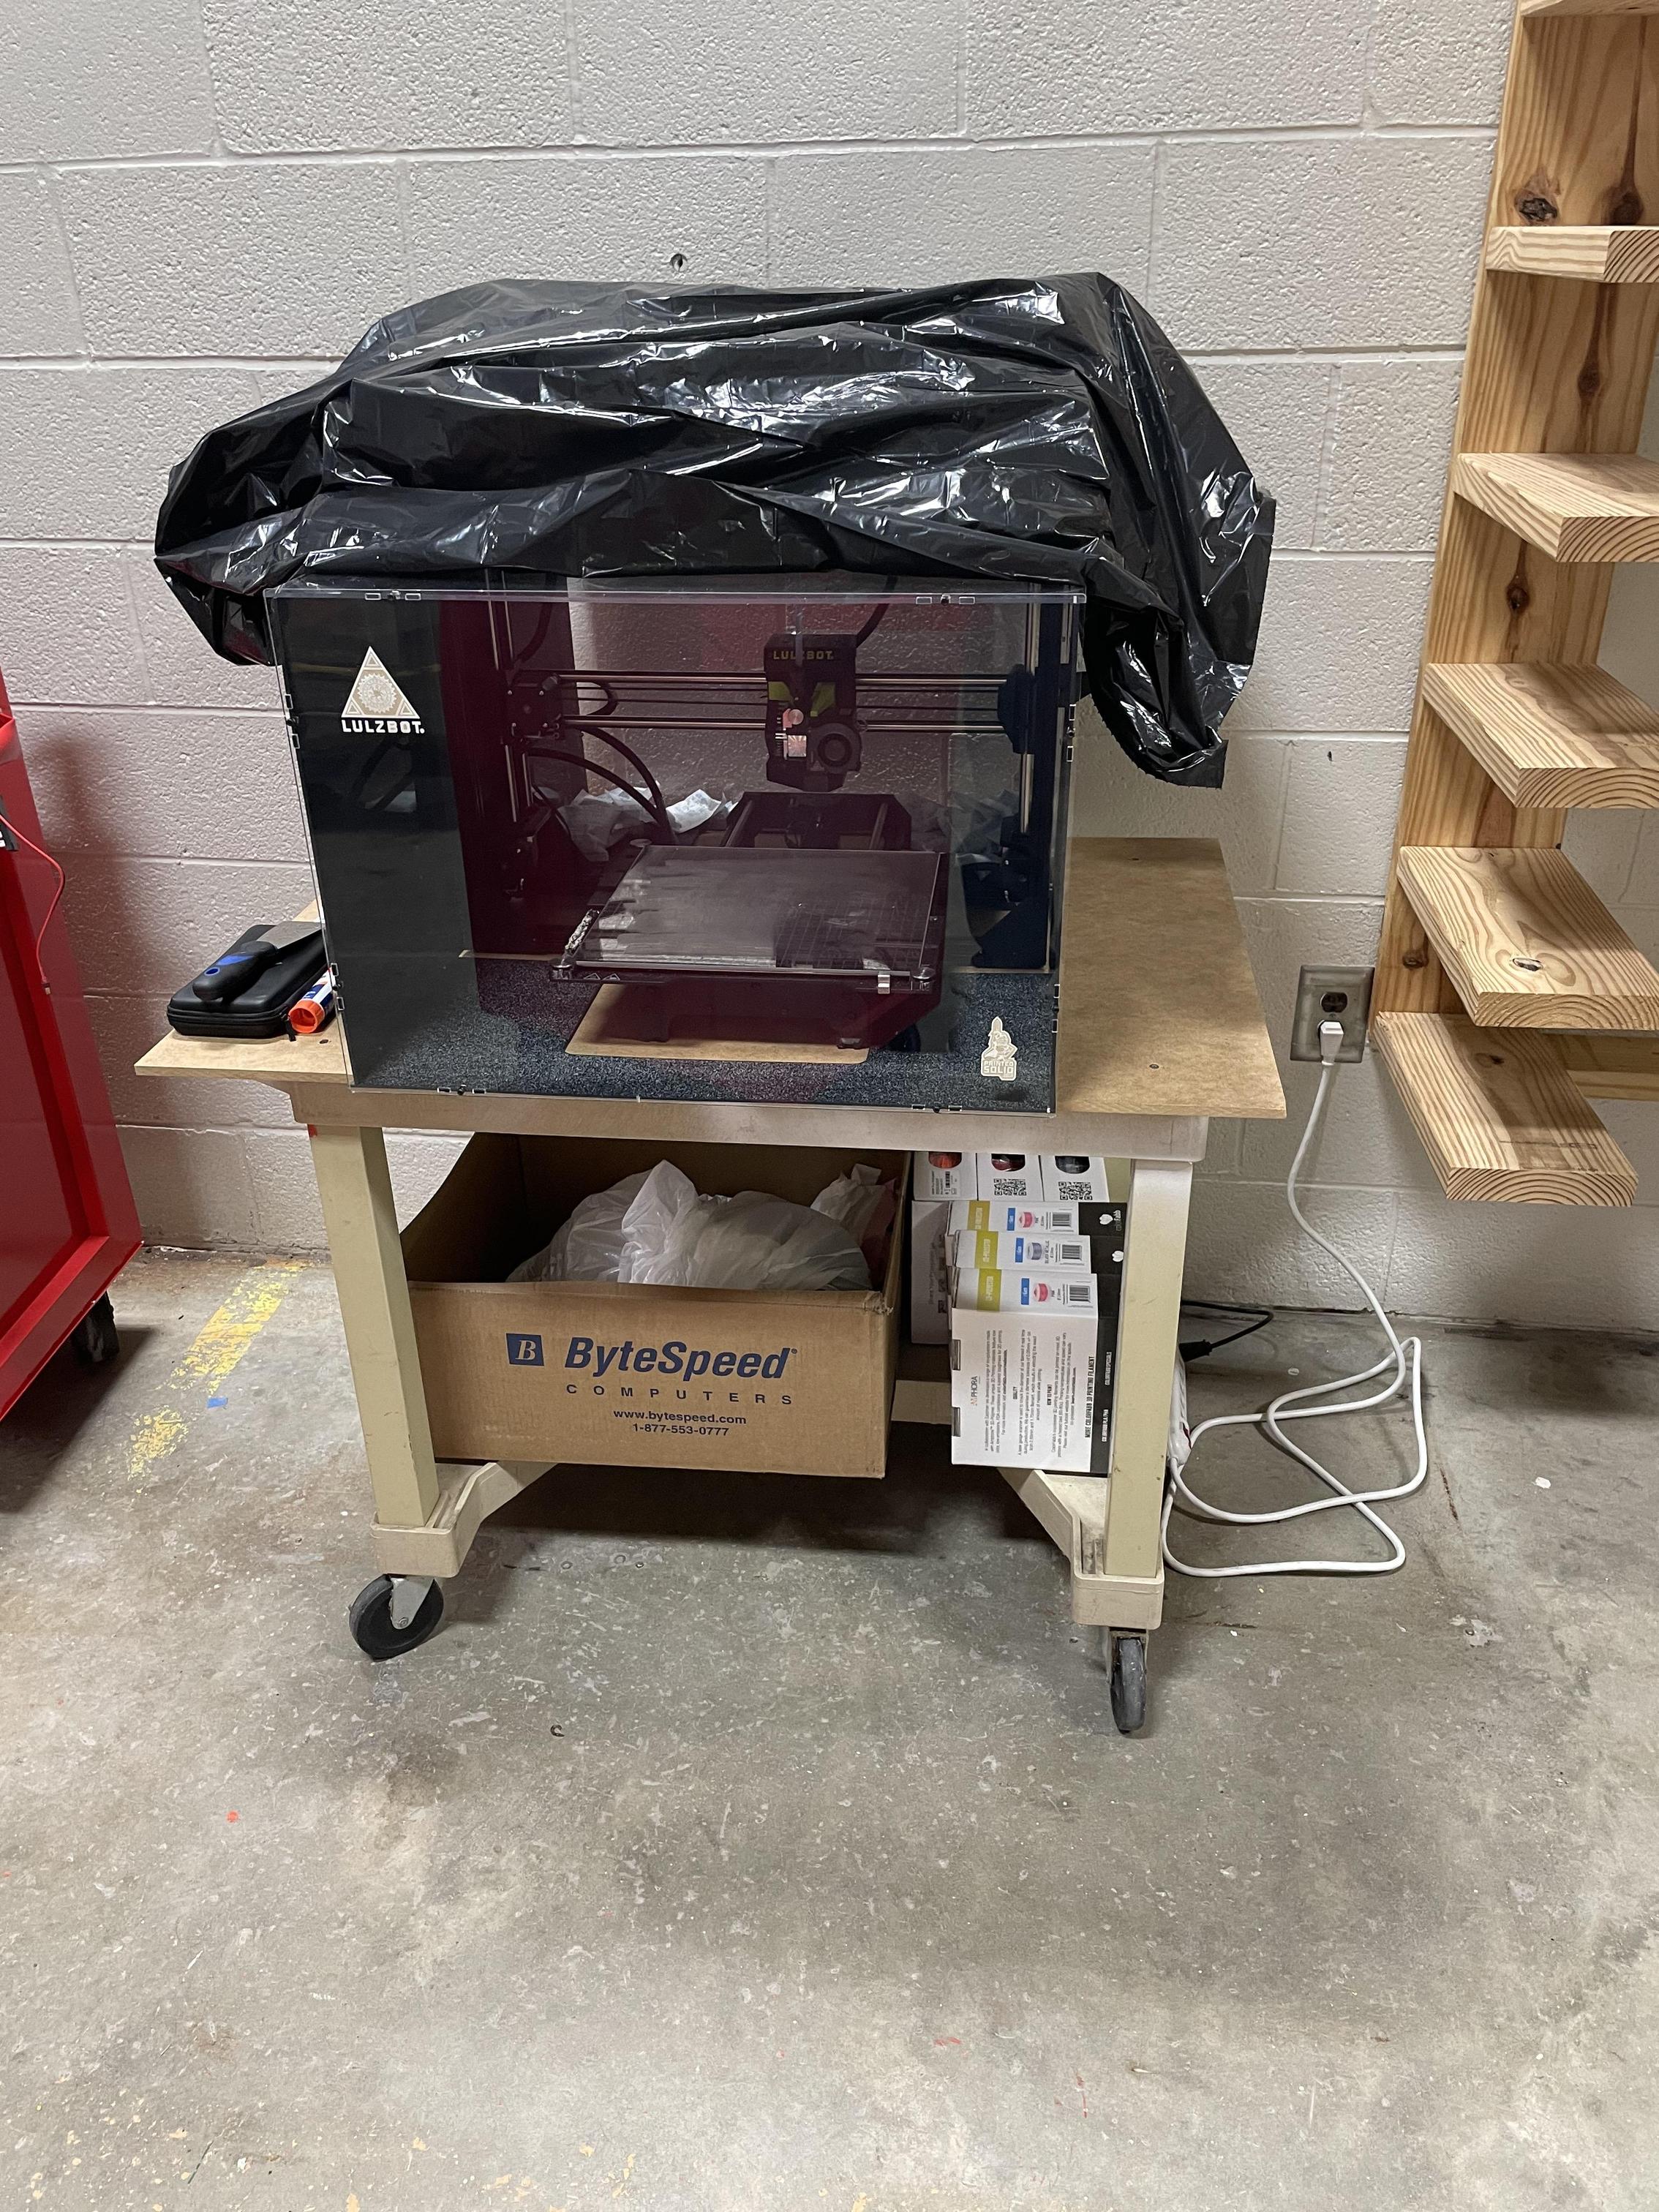 Our new 3D Printer compliments of CTE!